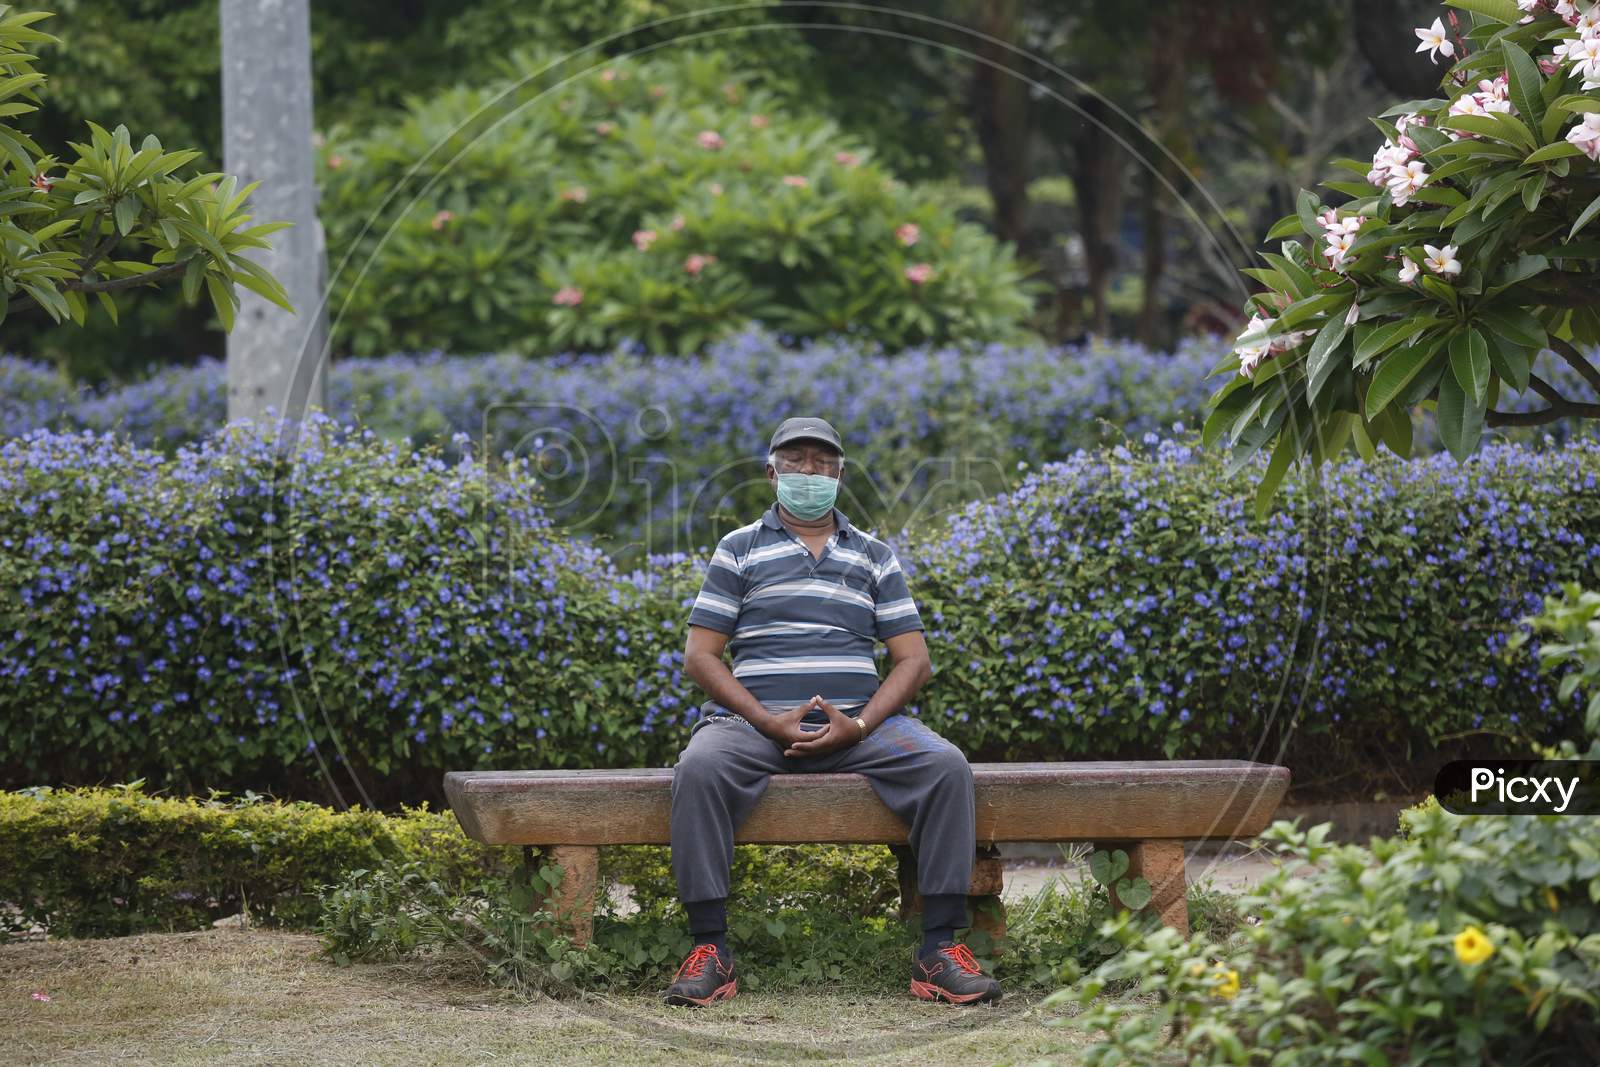 A man performs breathing exercises in Cubbon Park after the state eased lockdown norms during the nationwide lockdown to prevent the spread of coronavirus (COVID-19) in Bangalore, India.